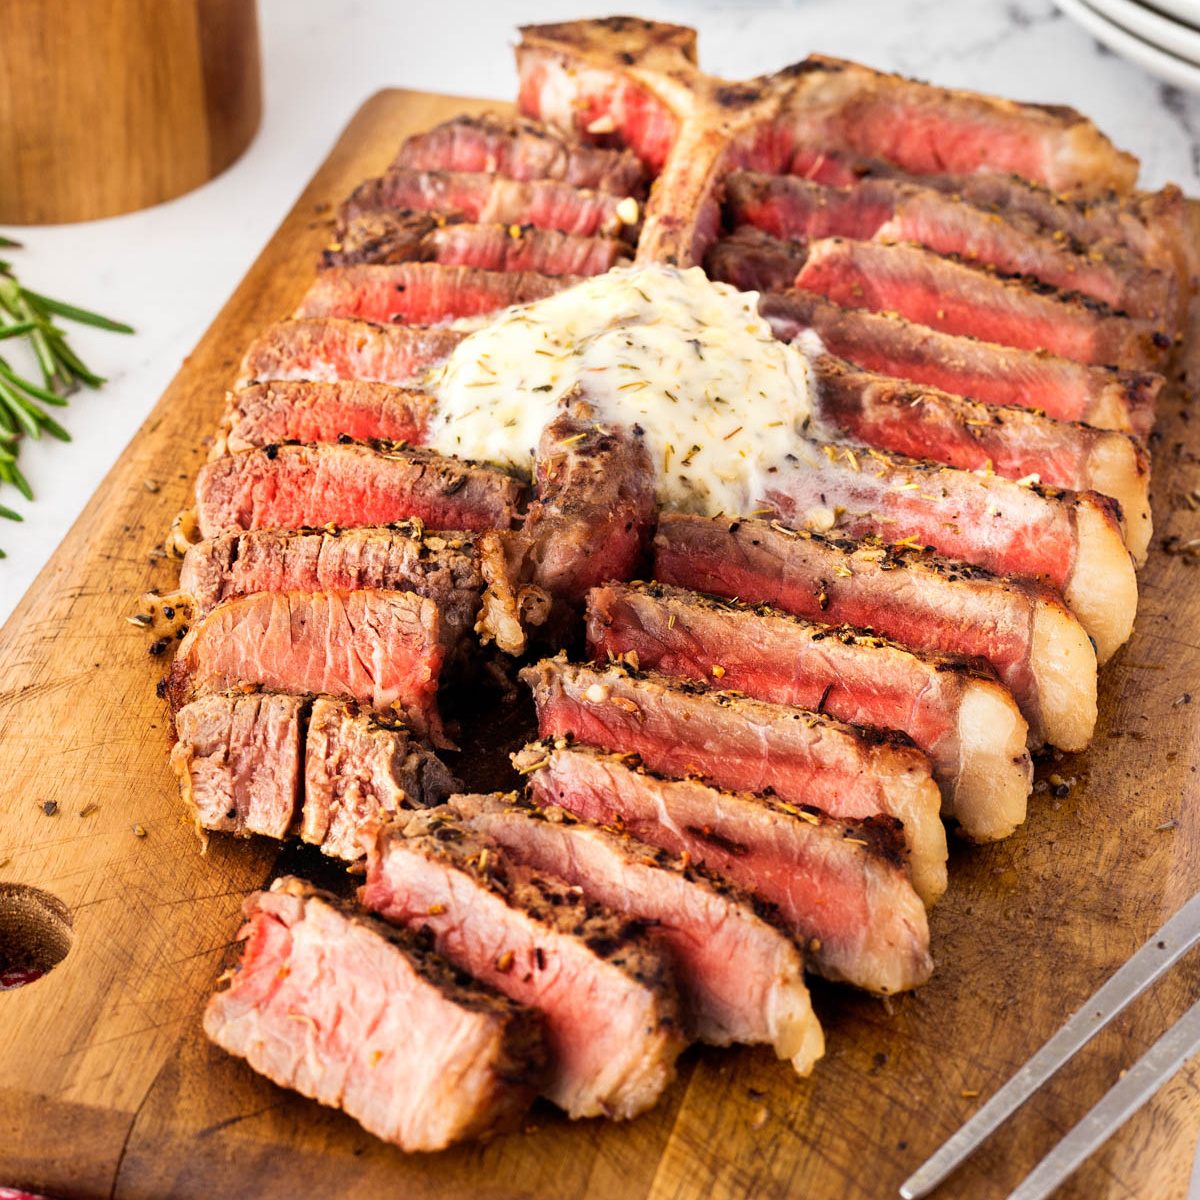 Grilled porterhouse steak sliced and ready to serve on a wooden cutting board.